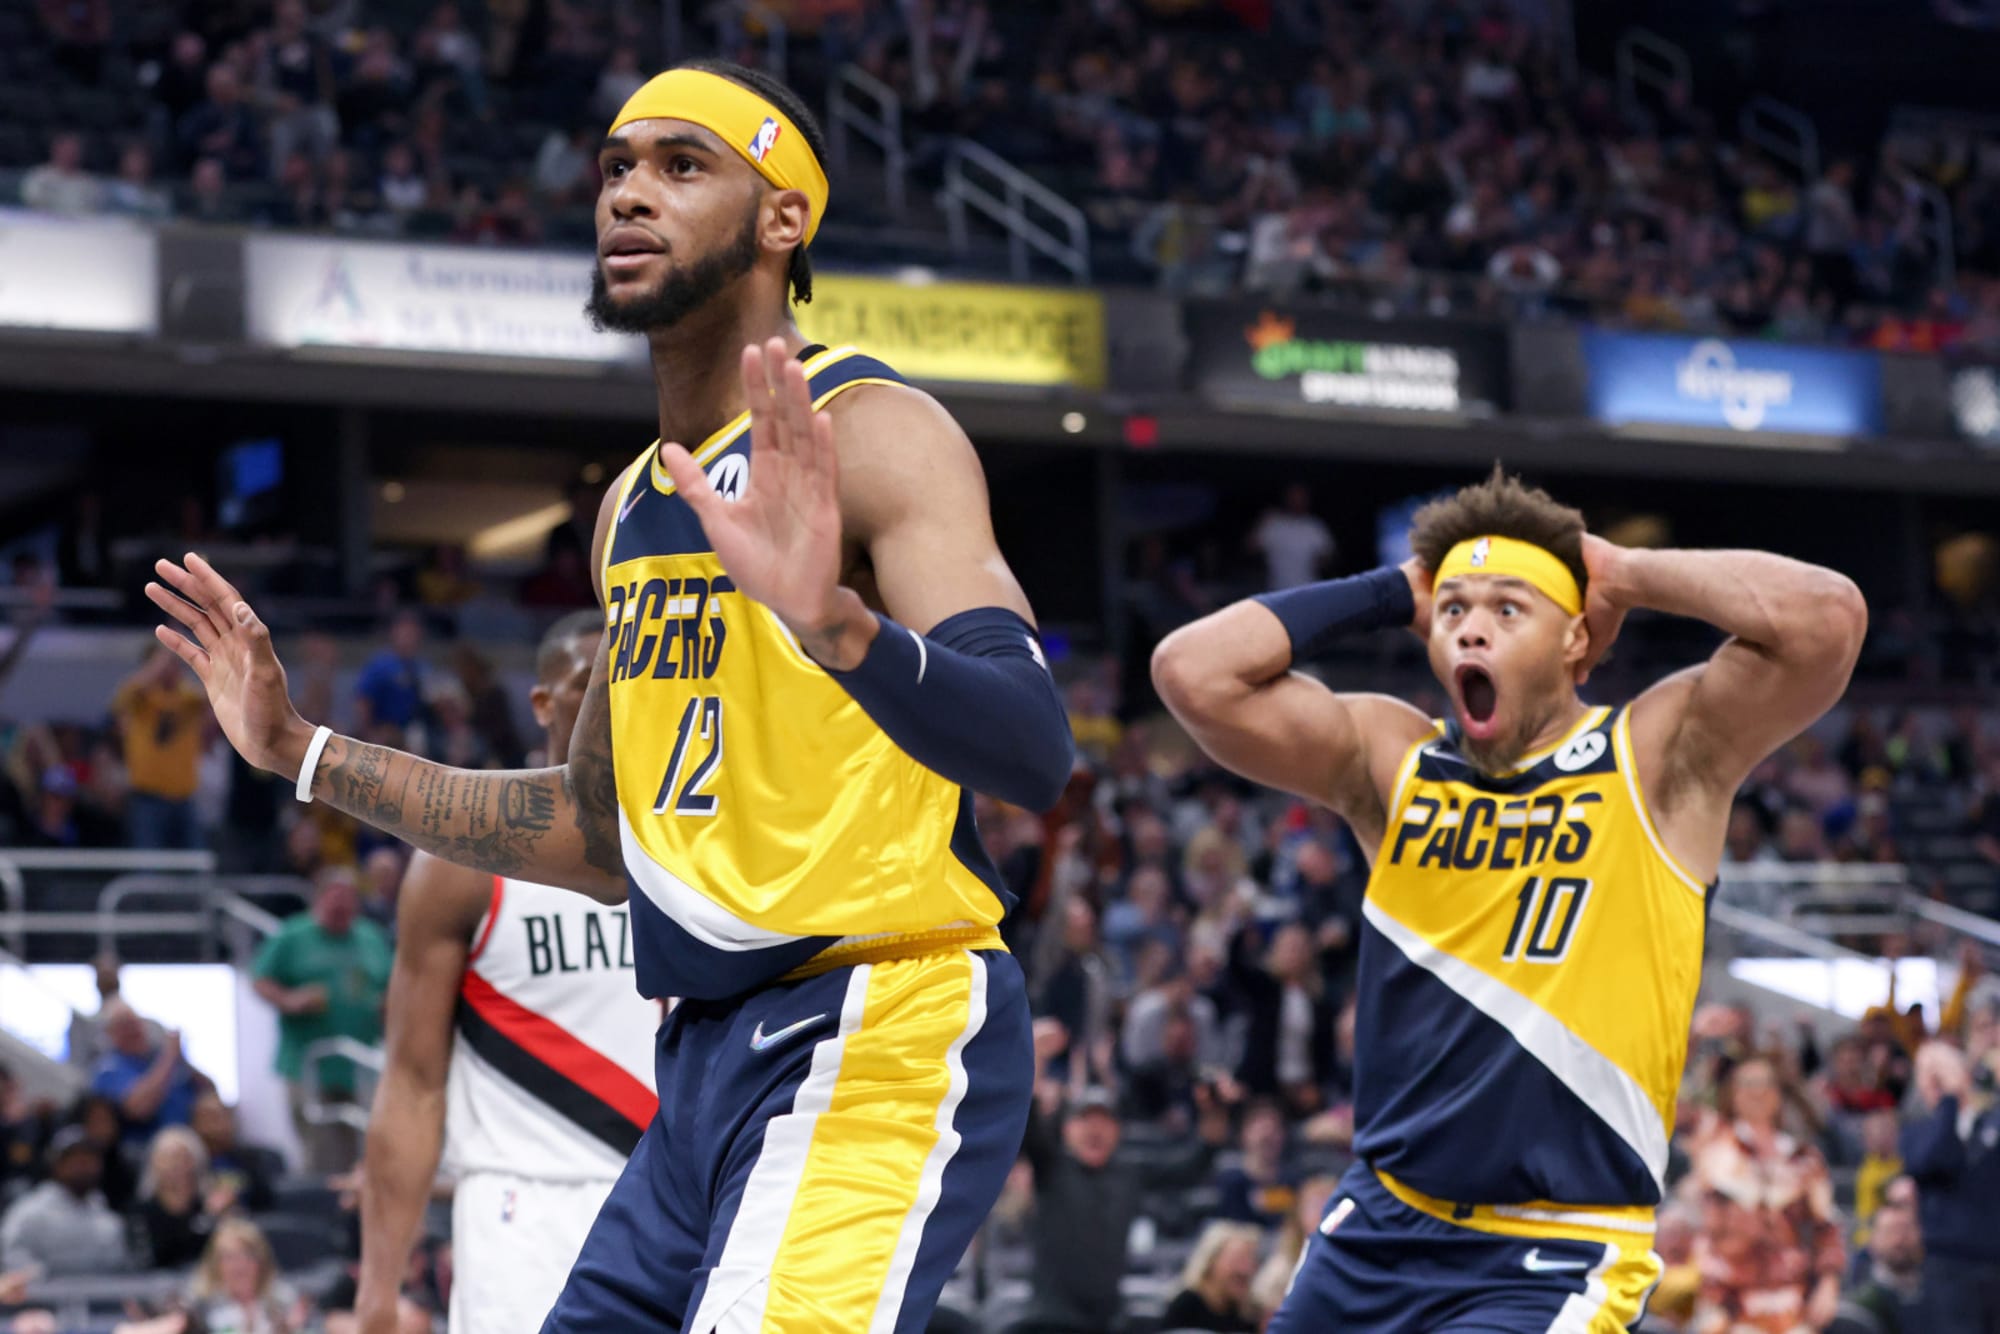 Indiana Pacers on X: 9⃣5⃣3⃣5⃣ the squad set a new NBA